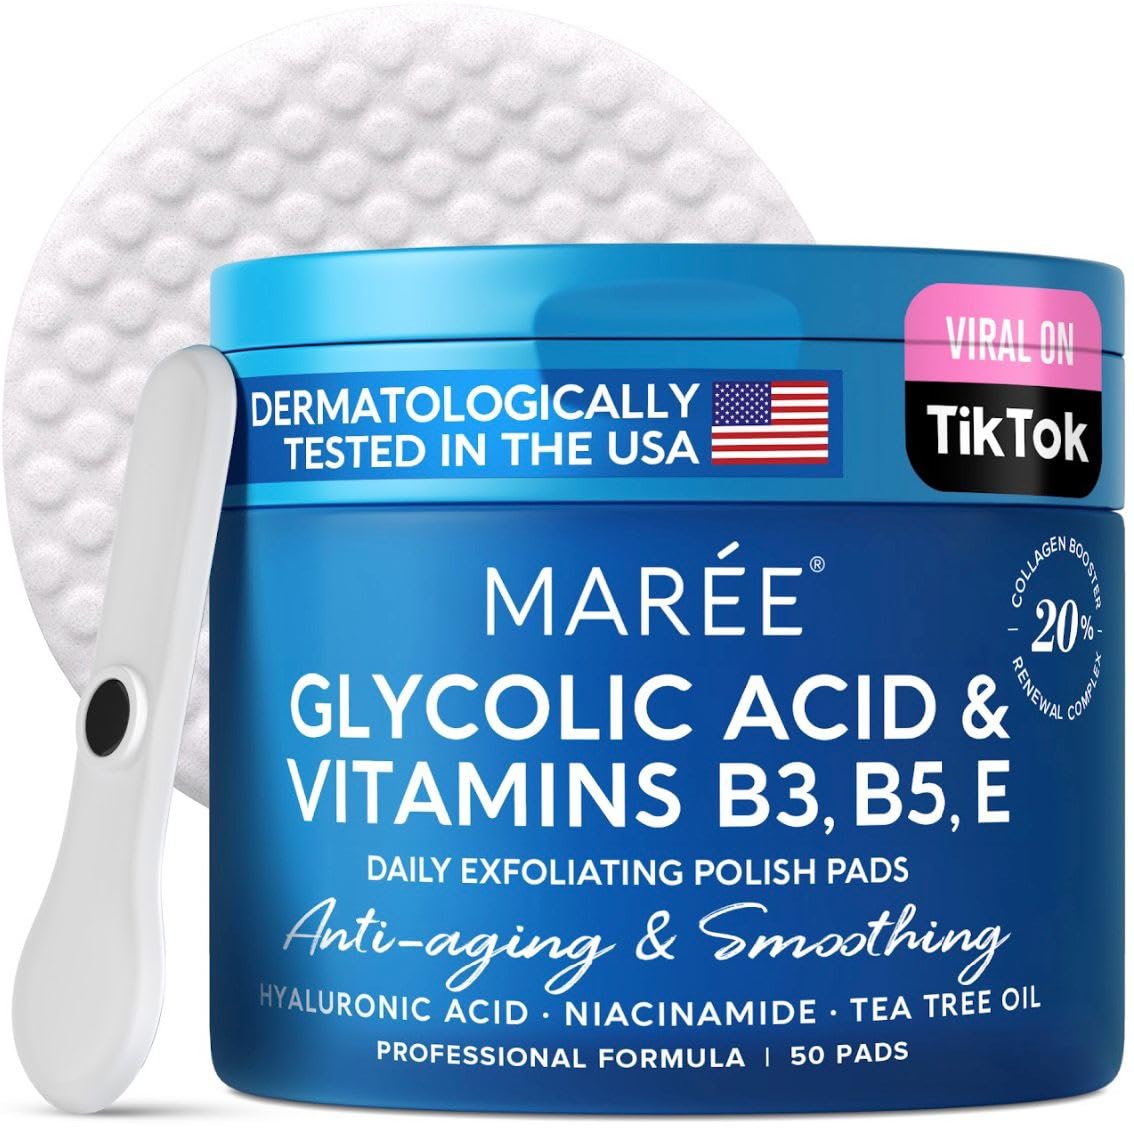 MAREE Facial Polish - Glycolic Acid Peel Pads For Face With Tea Tree Oil - Exfoliating Polish with Salicylic Acid & Vitamins E, B3, B5 - Face Pads with Skin Peeling & Deep Cleaning Effect